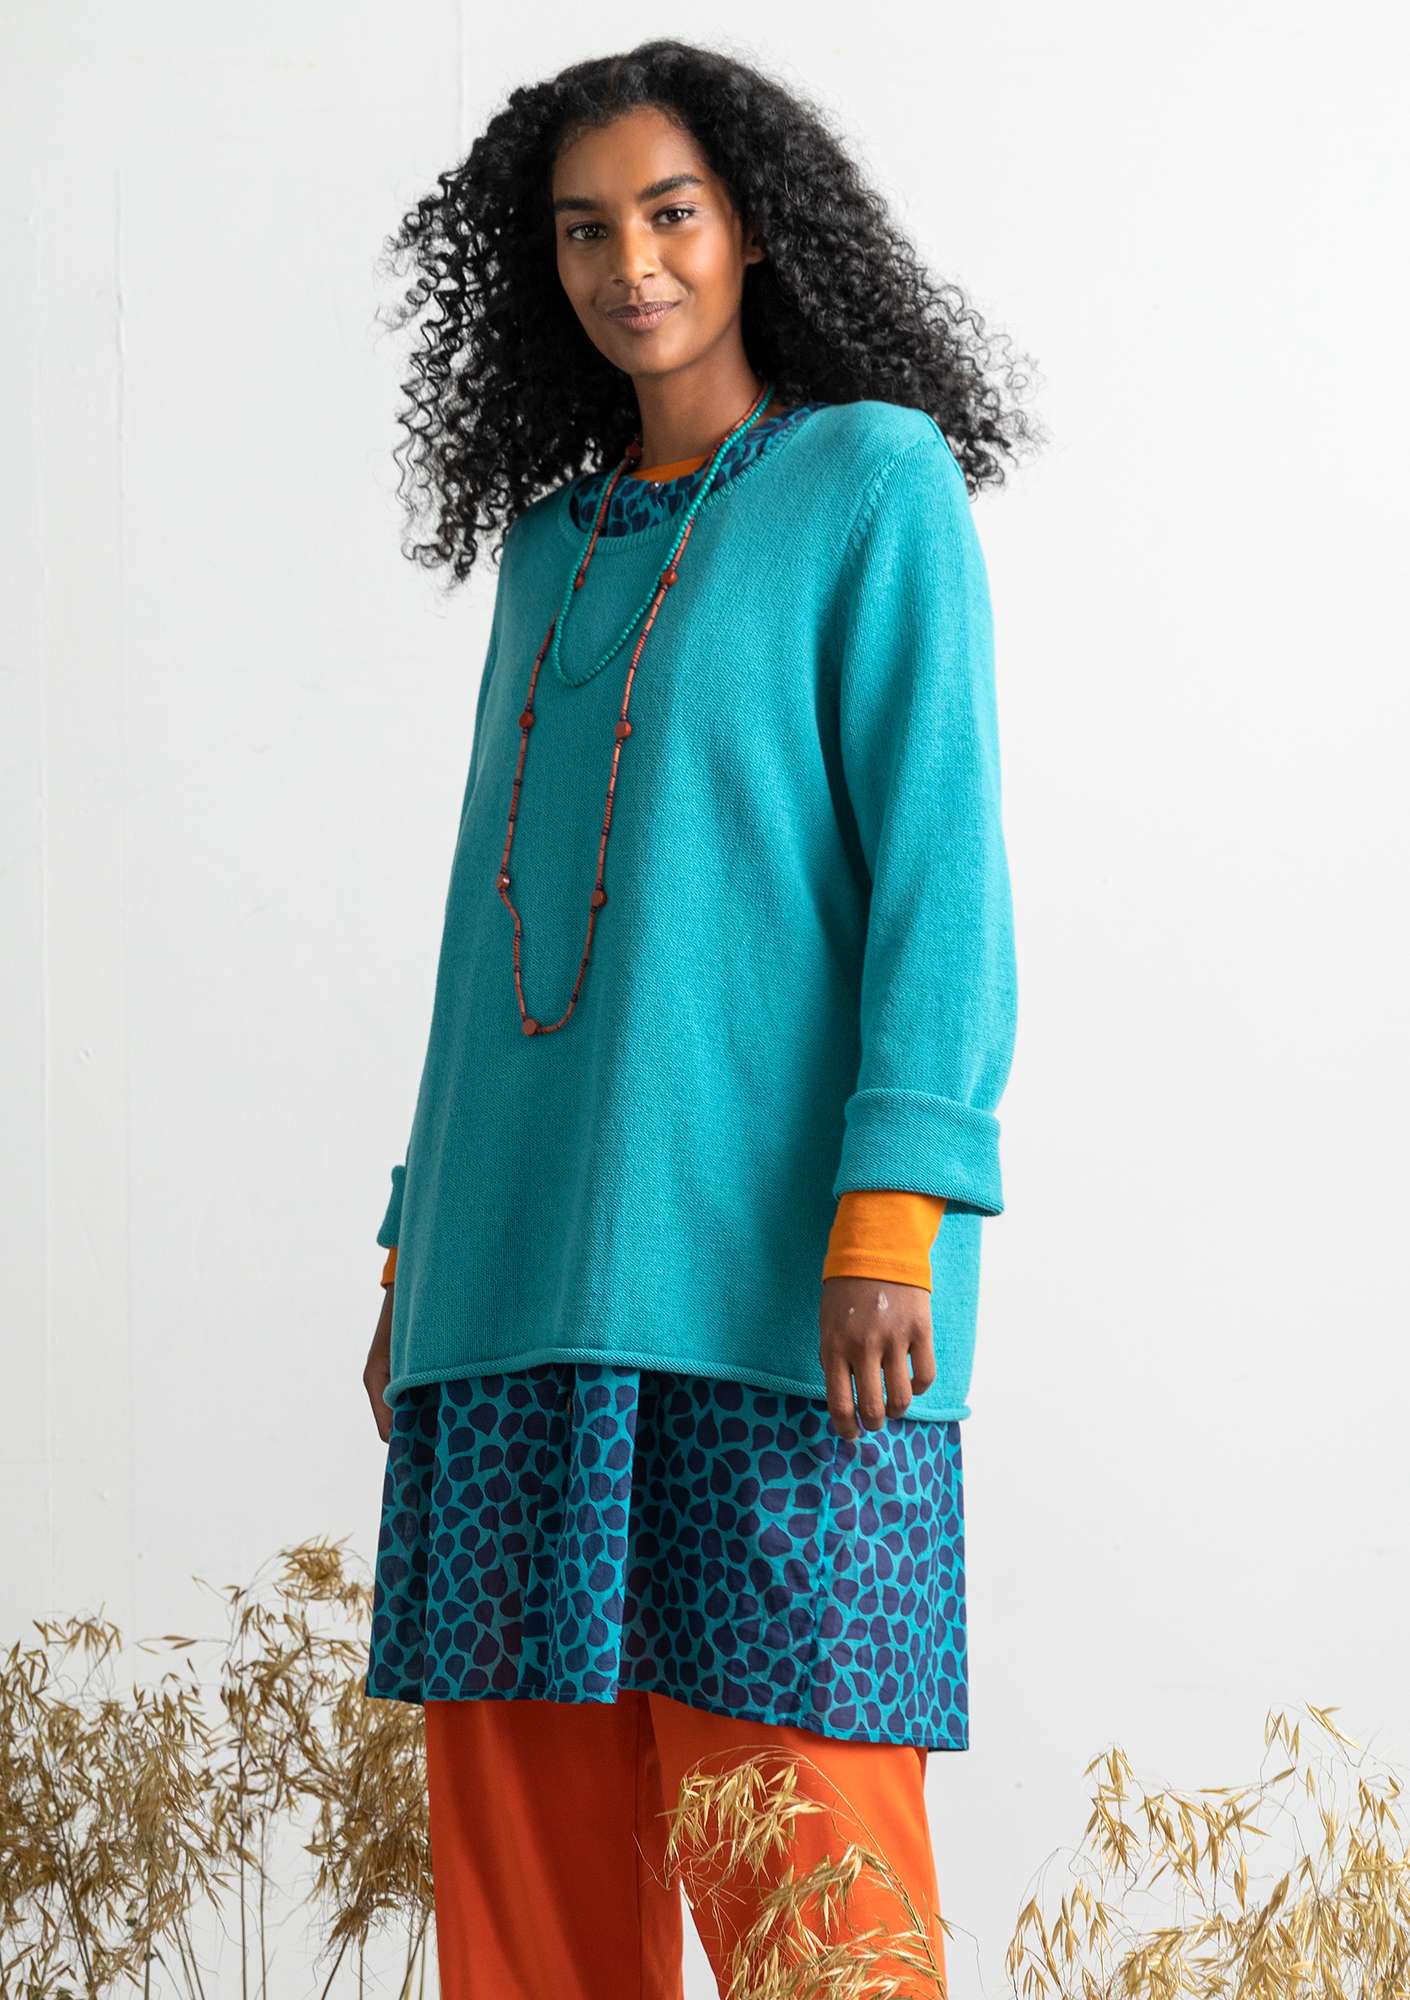 FAVOURITE “Adena” long-sleeved recycled cotton top turquoise